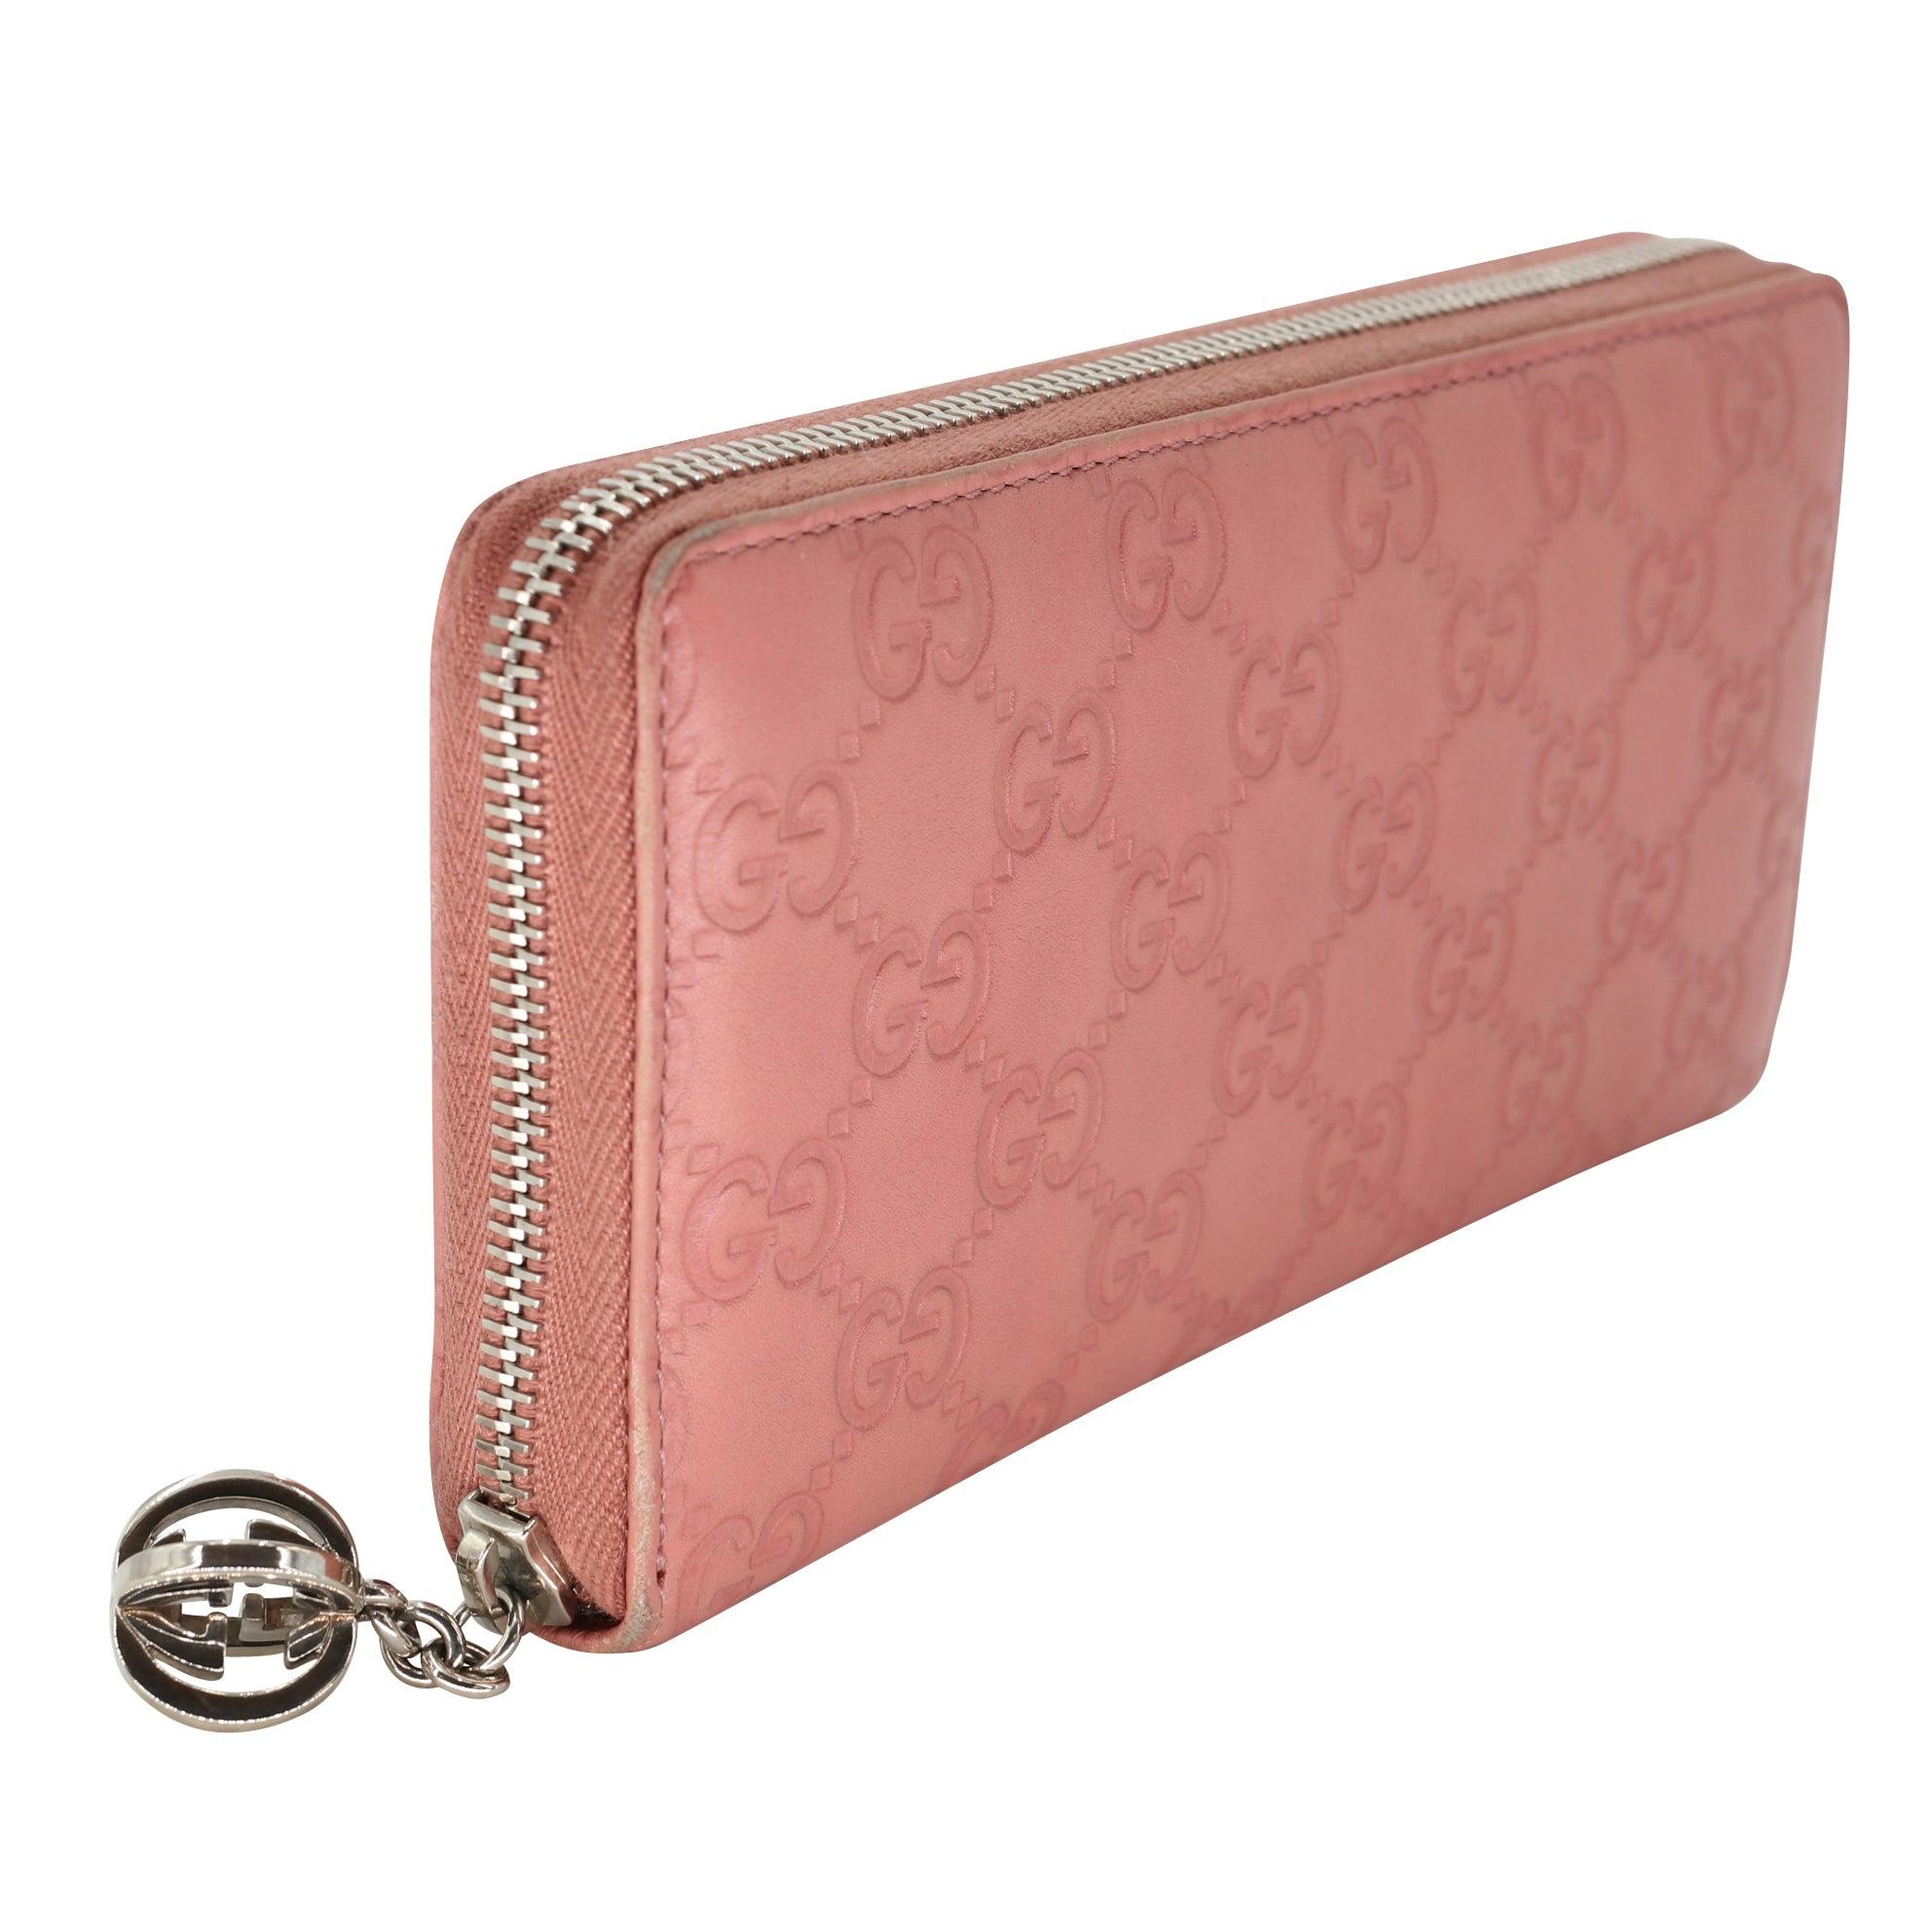 Gucci GG Guccissima Pink Leather Zip Around Wallet LV-W1110P-A003 In Good Condition For Sale In Downey, CA